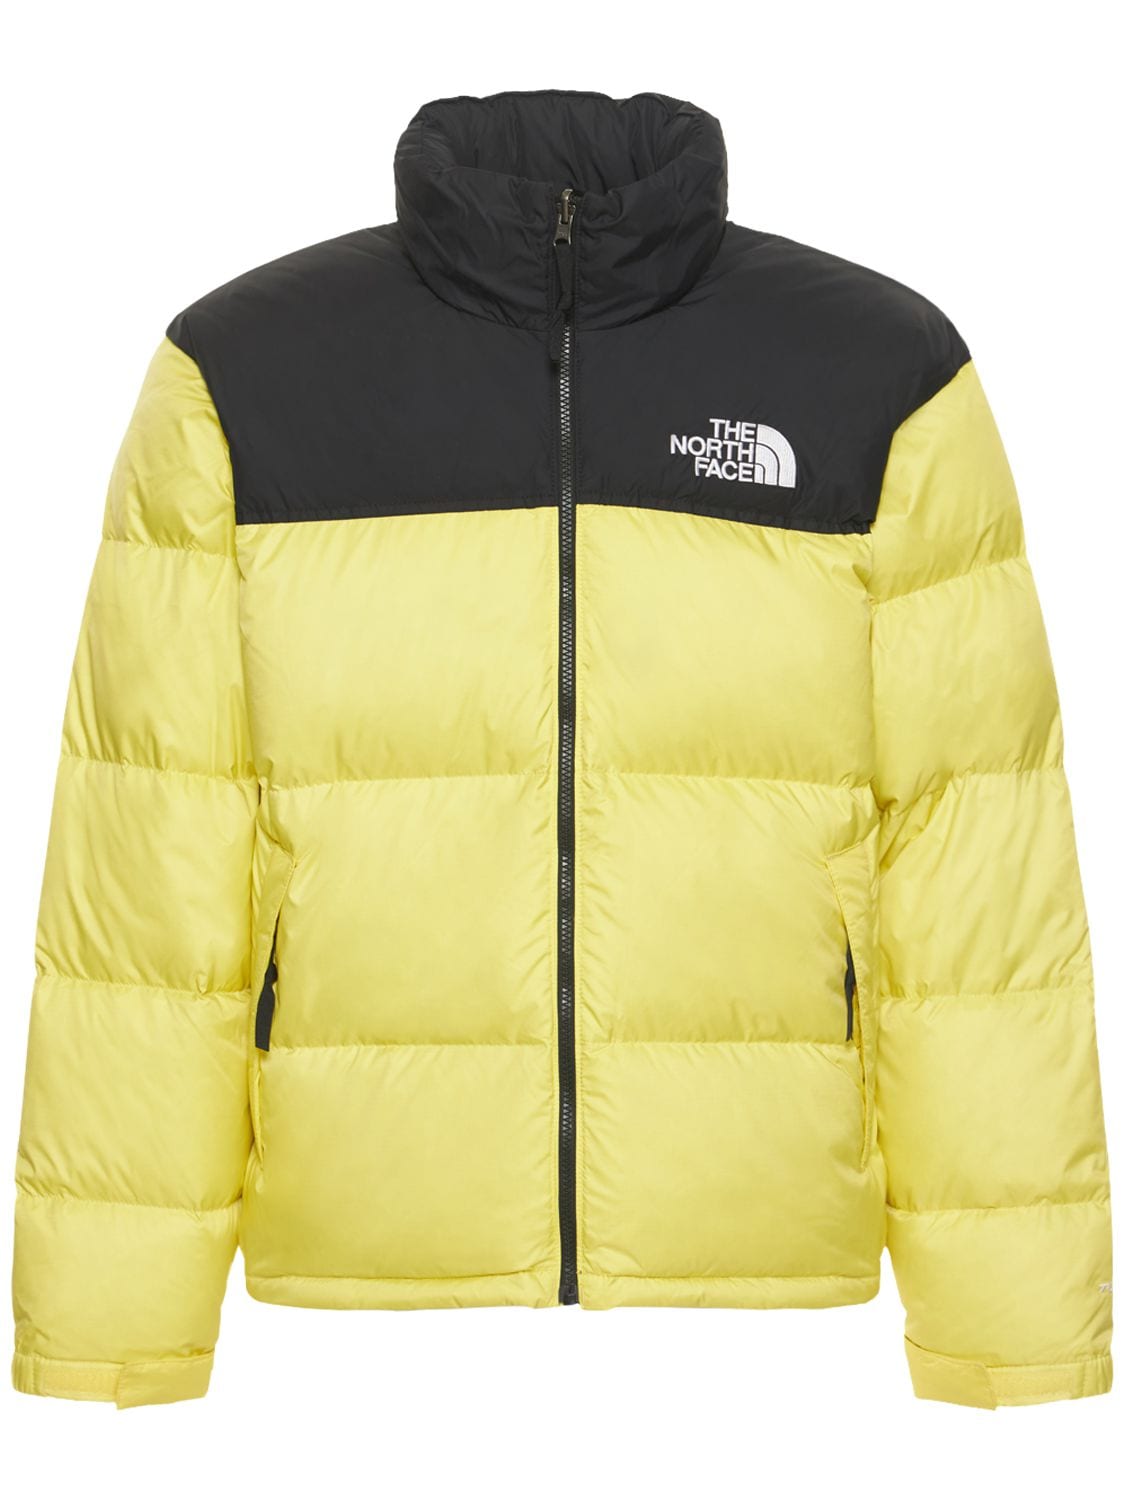 Sobriquette Fascinating stewardess The North Face 1996 Retro Nuptse Quilted Shell Hooded Down Jacket In Black  | ModeSens